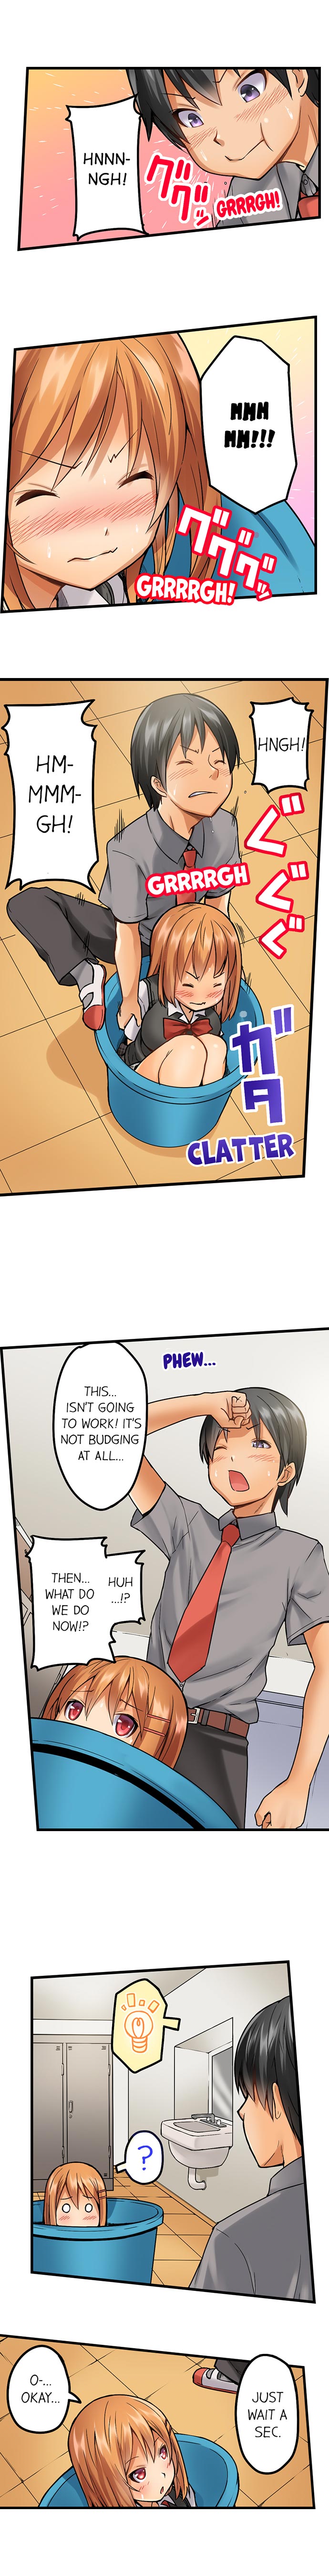 Trapped Sex in a Bucket - Chapter 1 Page 7